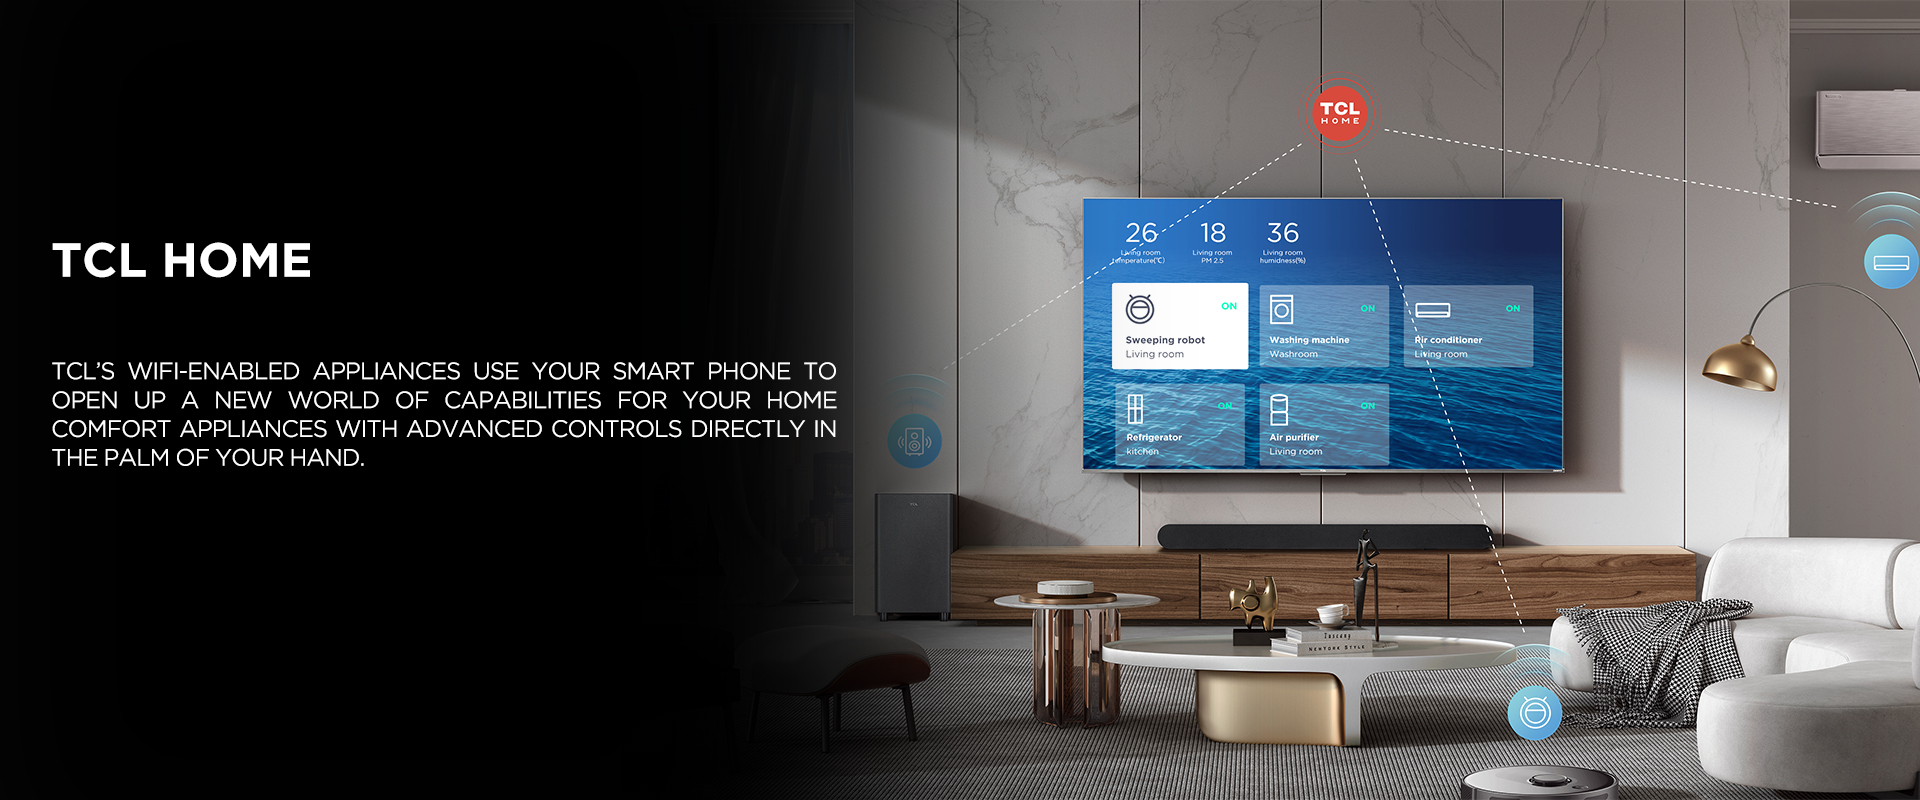 TCL HOME - TCLŸ??s WiFi-enabled appliances use your smart phone to open up a new world of capabilities for your home comfort appliances with advanced controls directly in the palm of your hand.